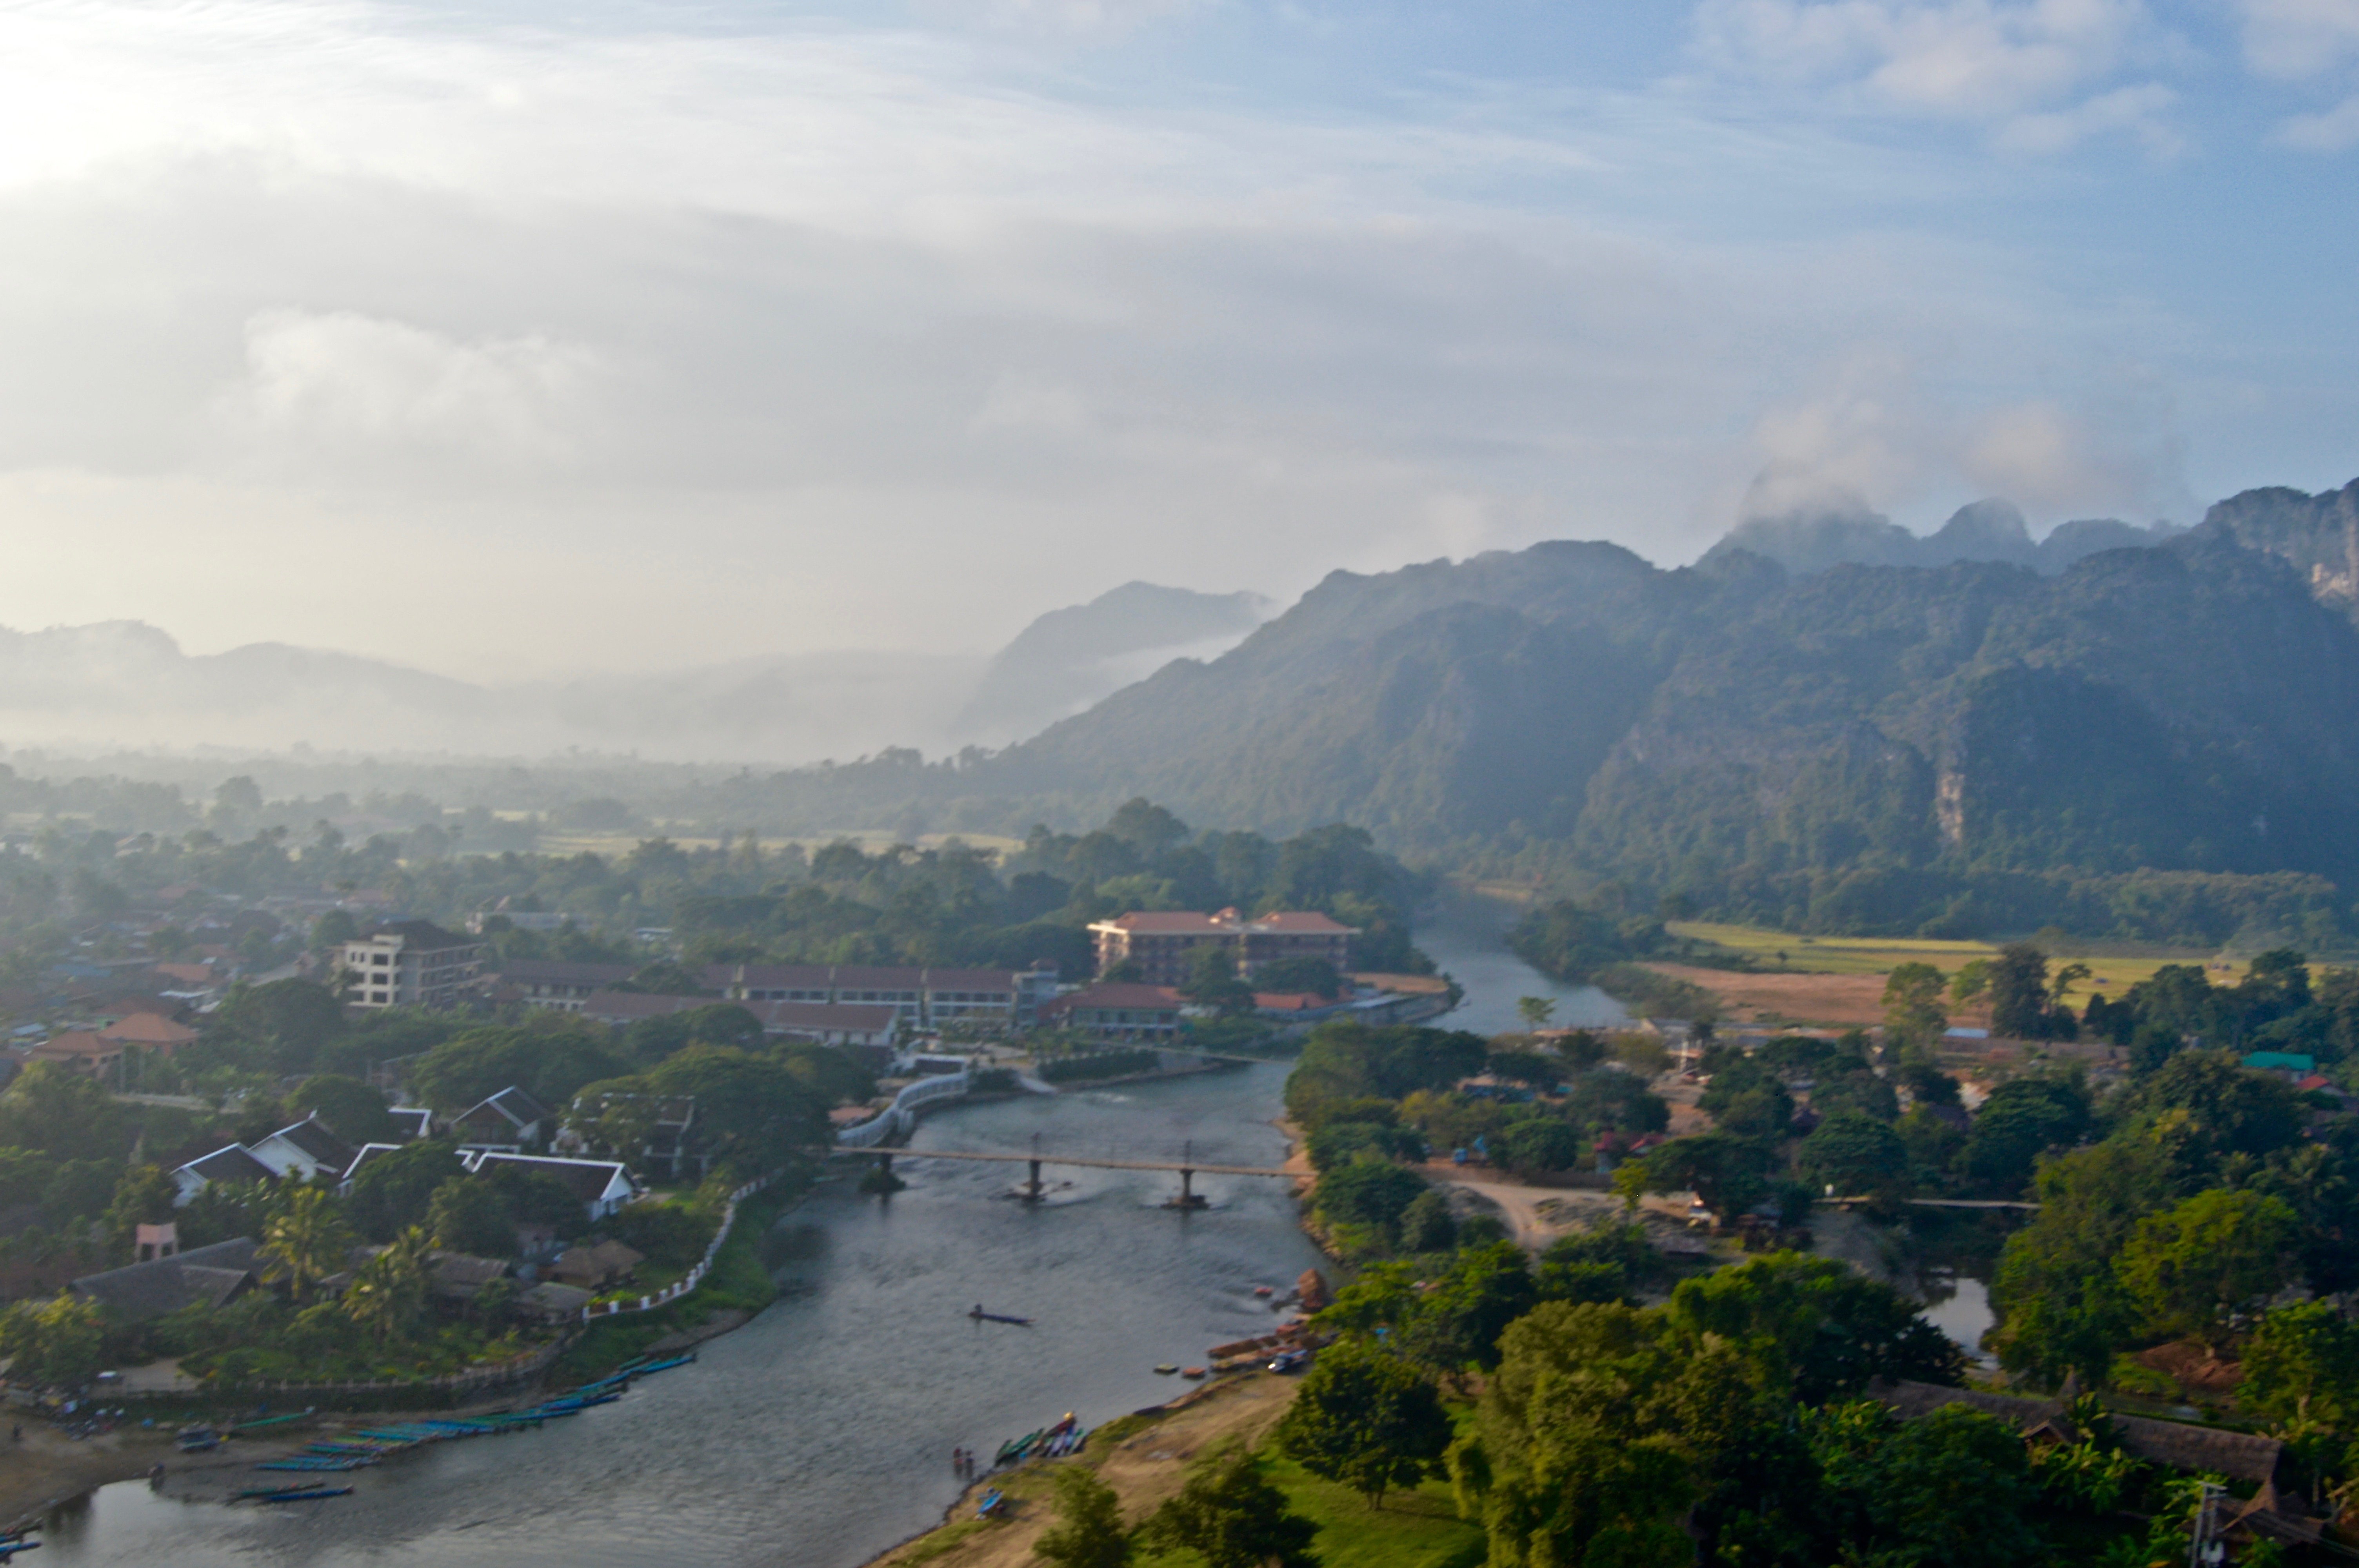 Soaring Over Vang Vieng: A Photo Gallery